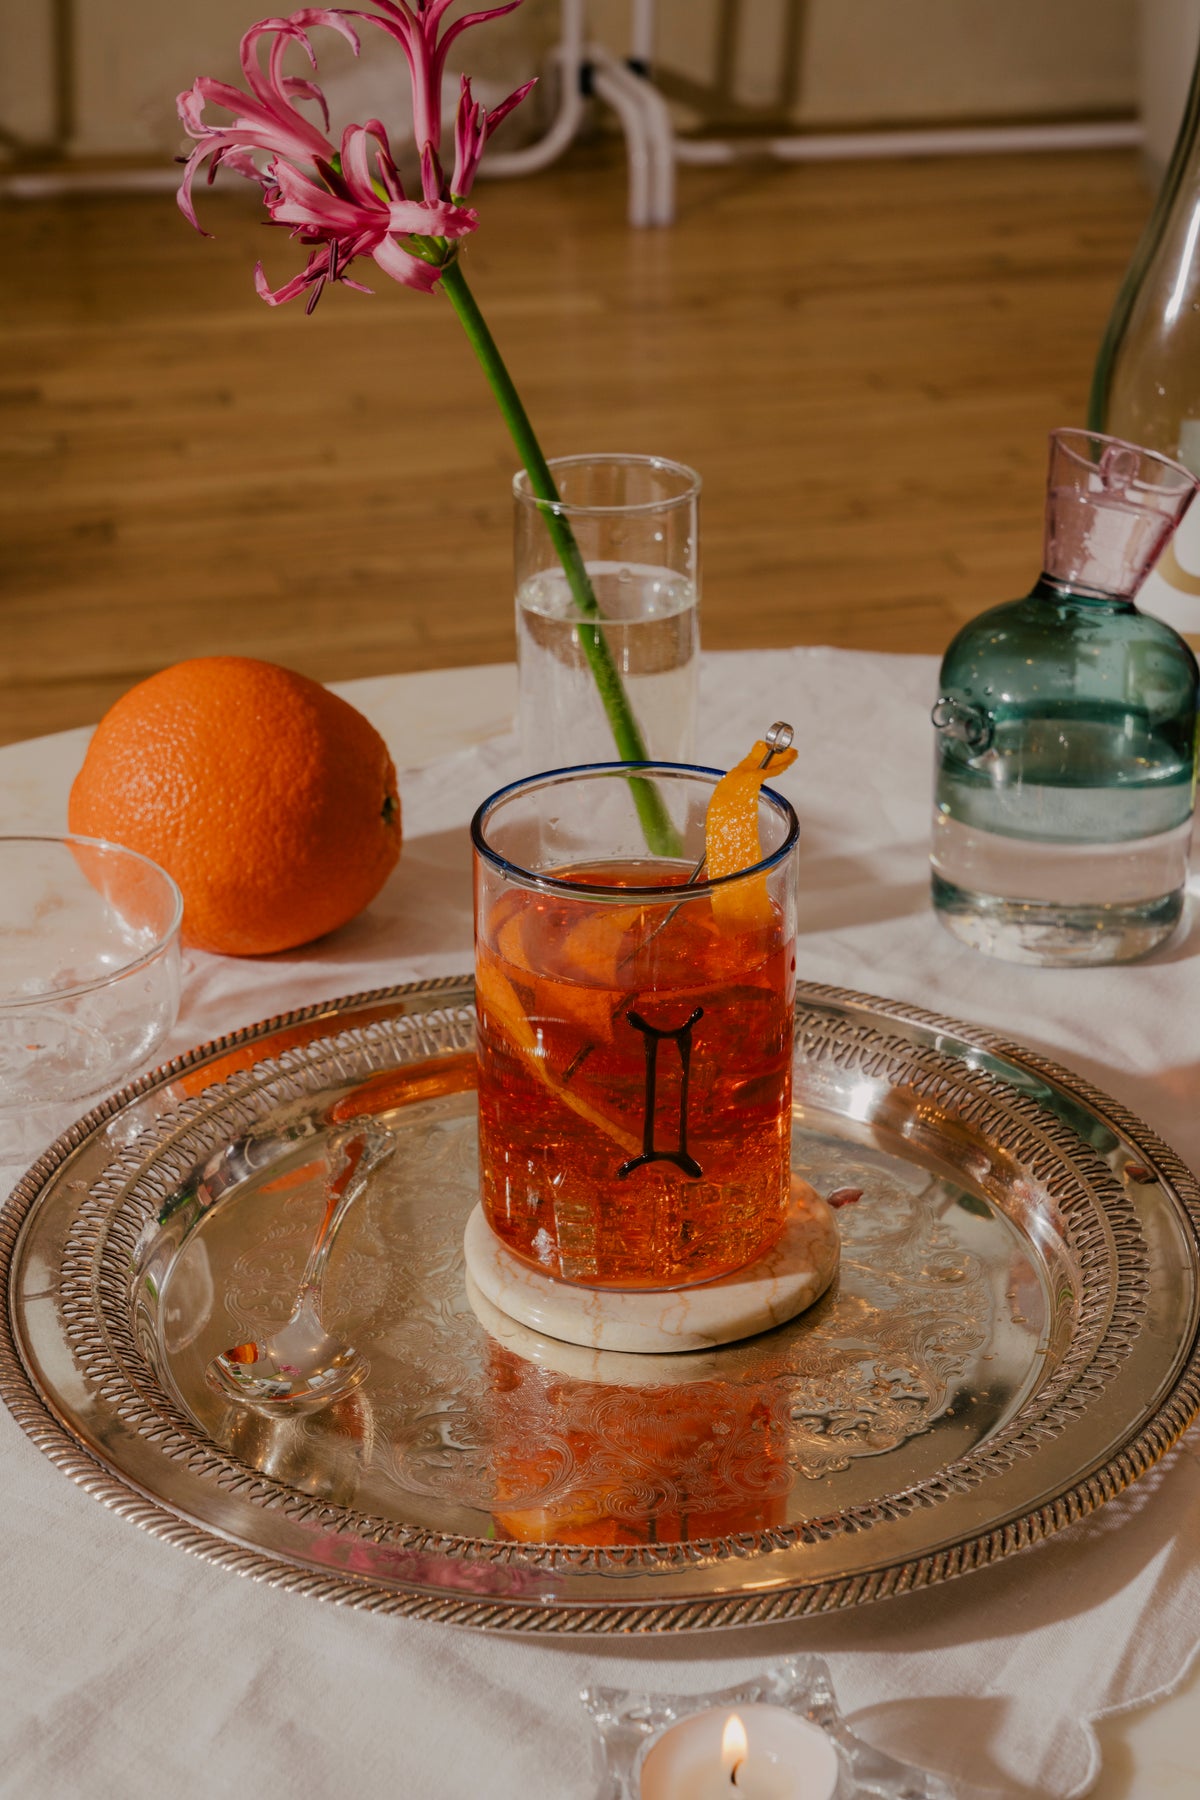 A cocktail glass adorned with a Gemini zodiac sign and rim in cobalt blue glass, with an aperol spritz, on a marble coaster atop a silver tray. An orange peel twist adds a touch of garnish. A slender vase holds a whimsical Nerine flower in hot pink. To the right, a teal oil cruet with that is filled with lemon juice for easy pouring. Beautiful colorful glassware for everyday use. Sold Individually. Murano glass tumbler is mouth-blown, hand-finished and dishwasher safe.